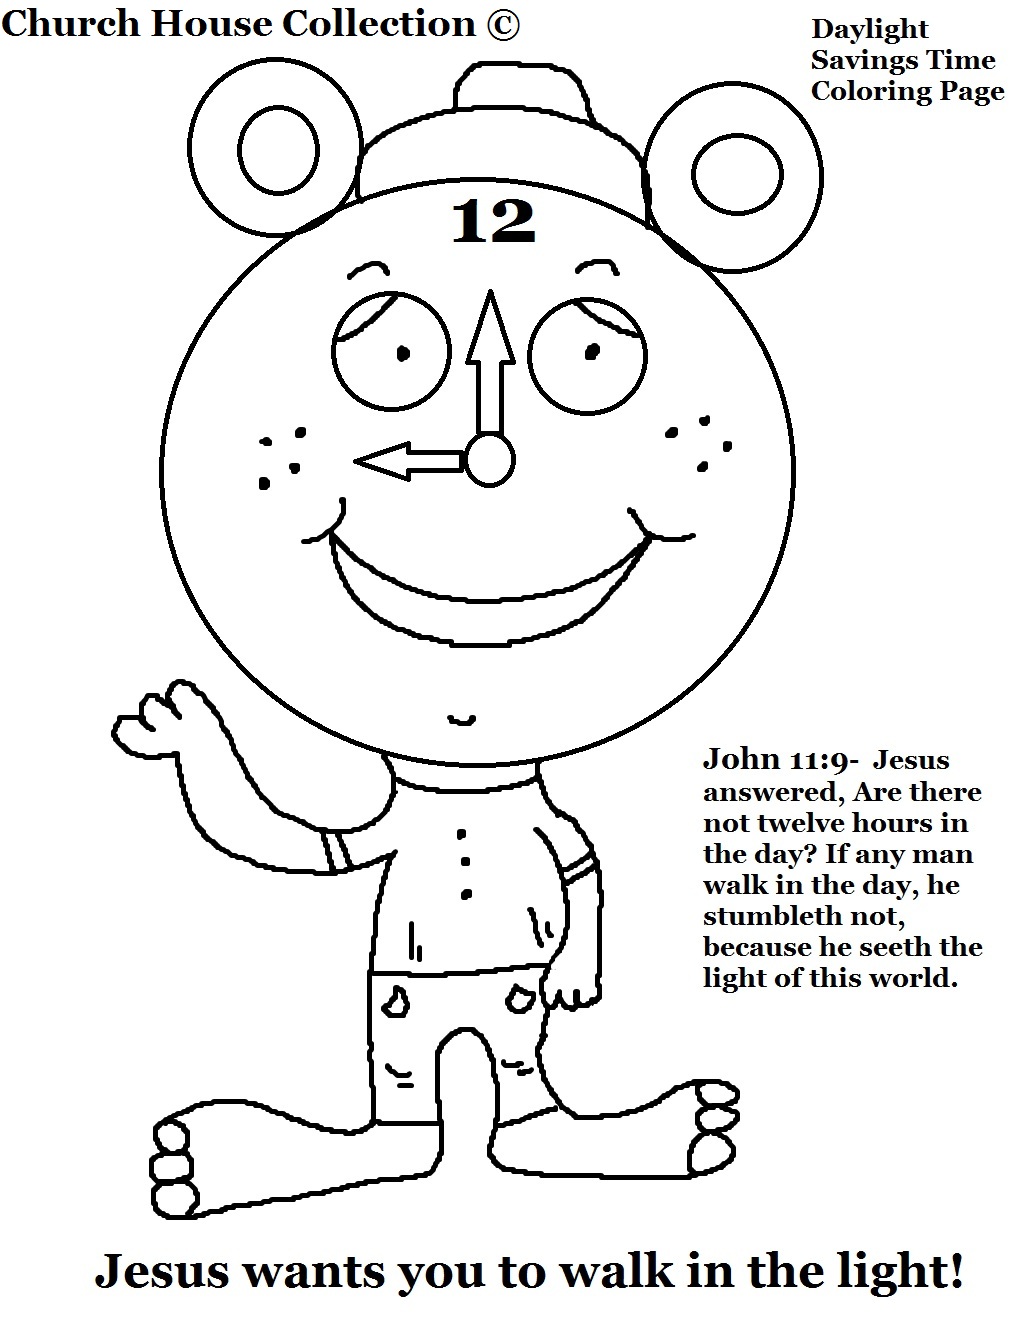 Download Daylight Savings Time Coloring Pages